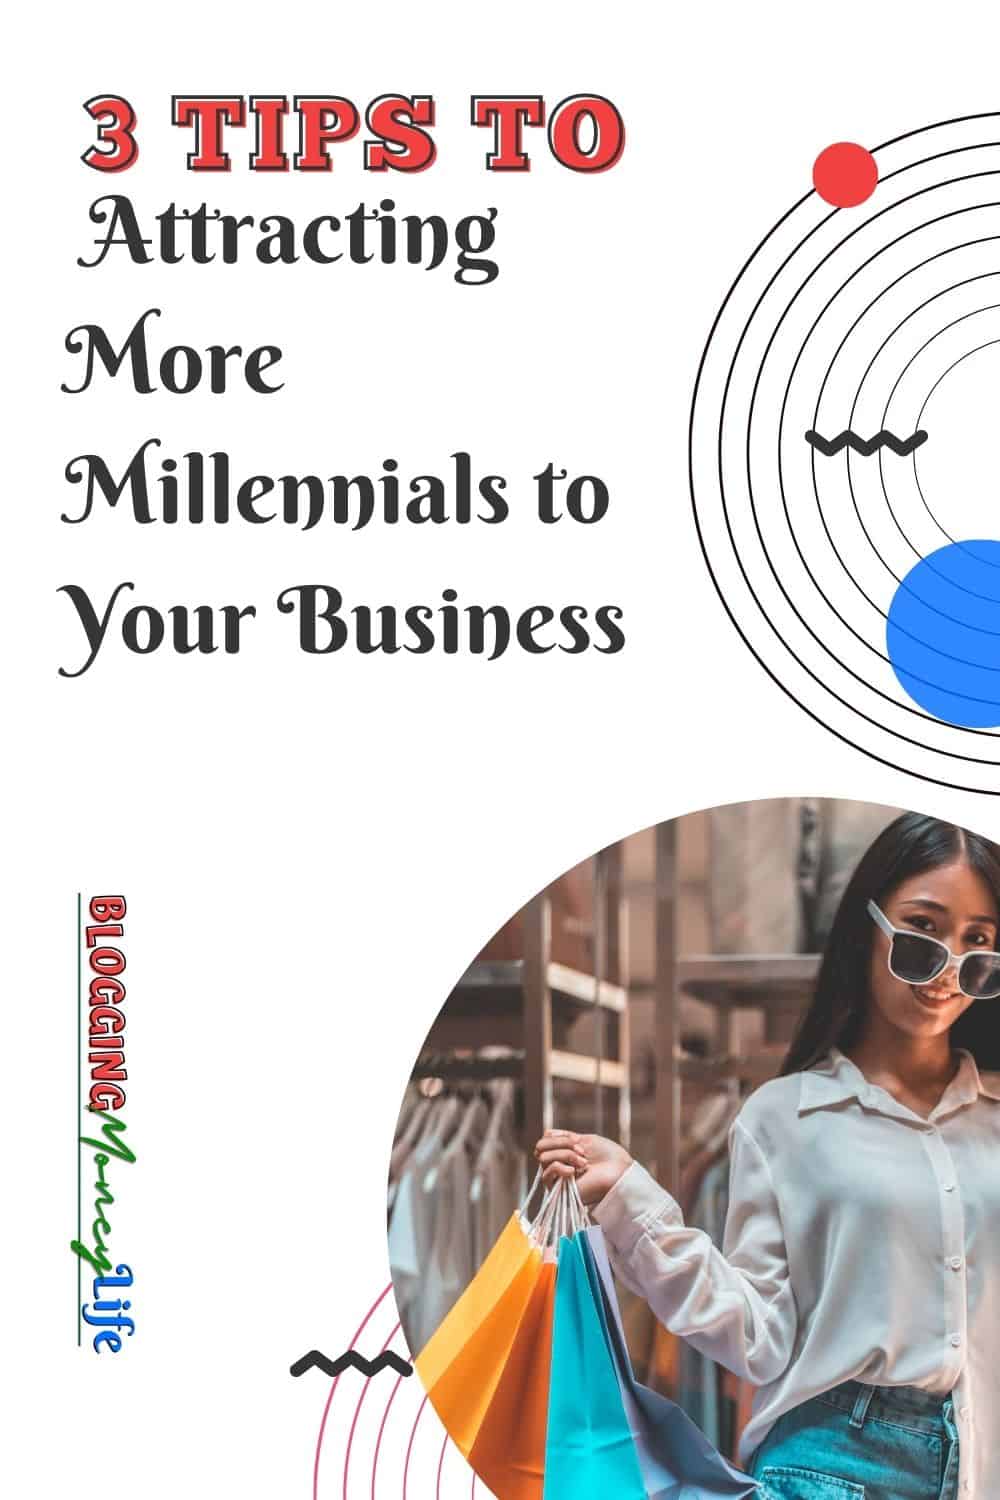 3 Tips to Attracting More Millennials to Your Business